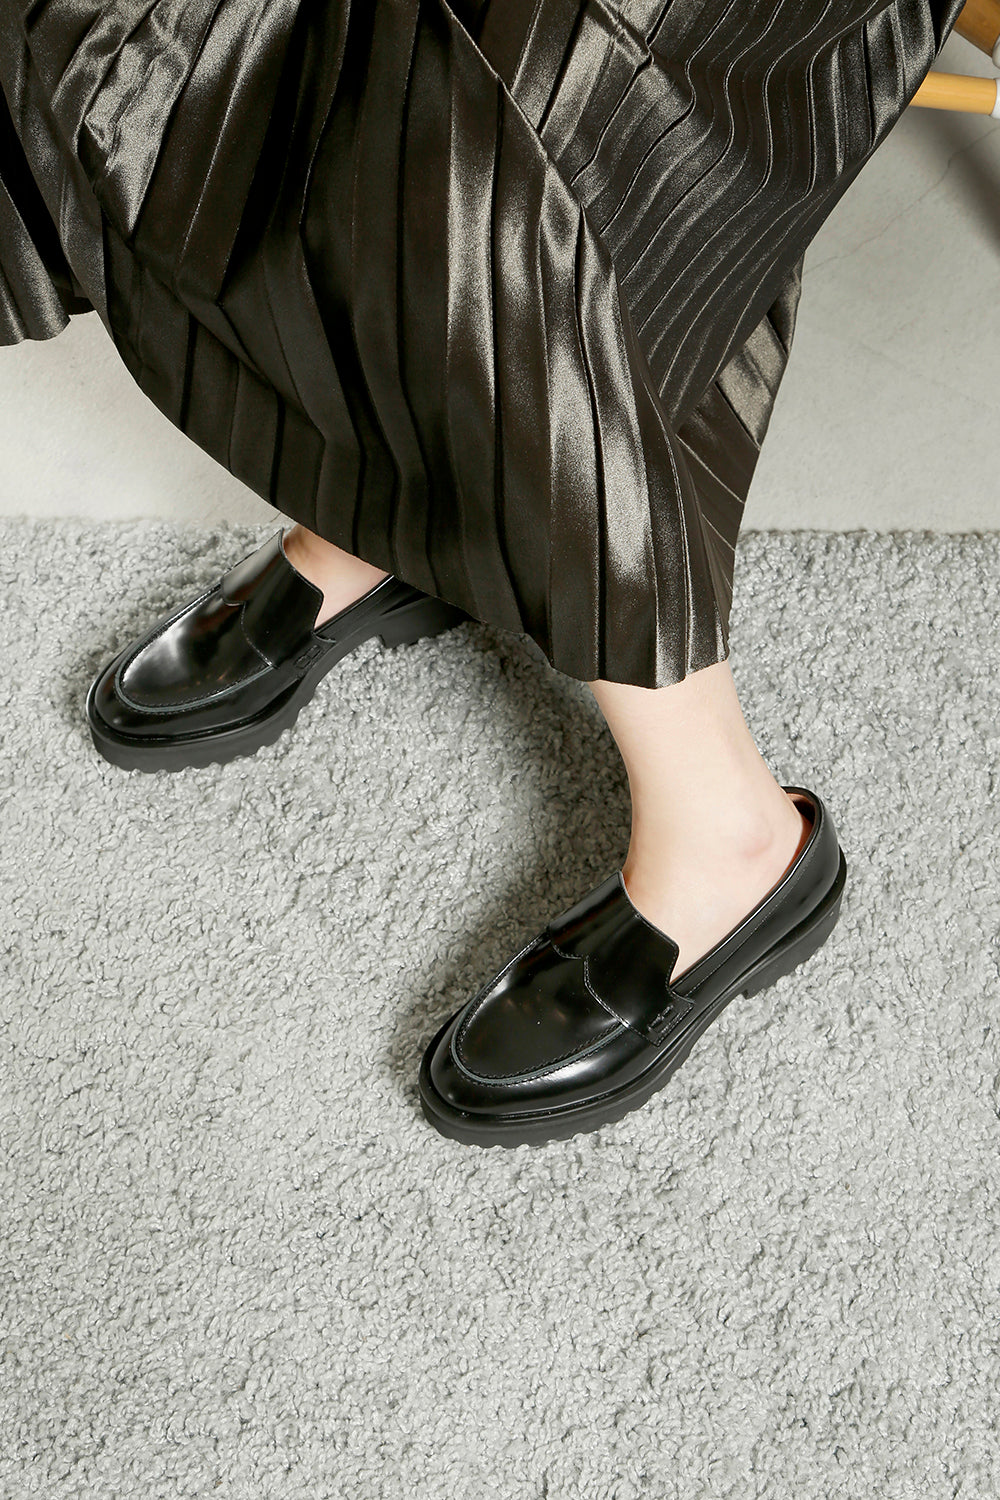 Lugg Lady Loafer